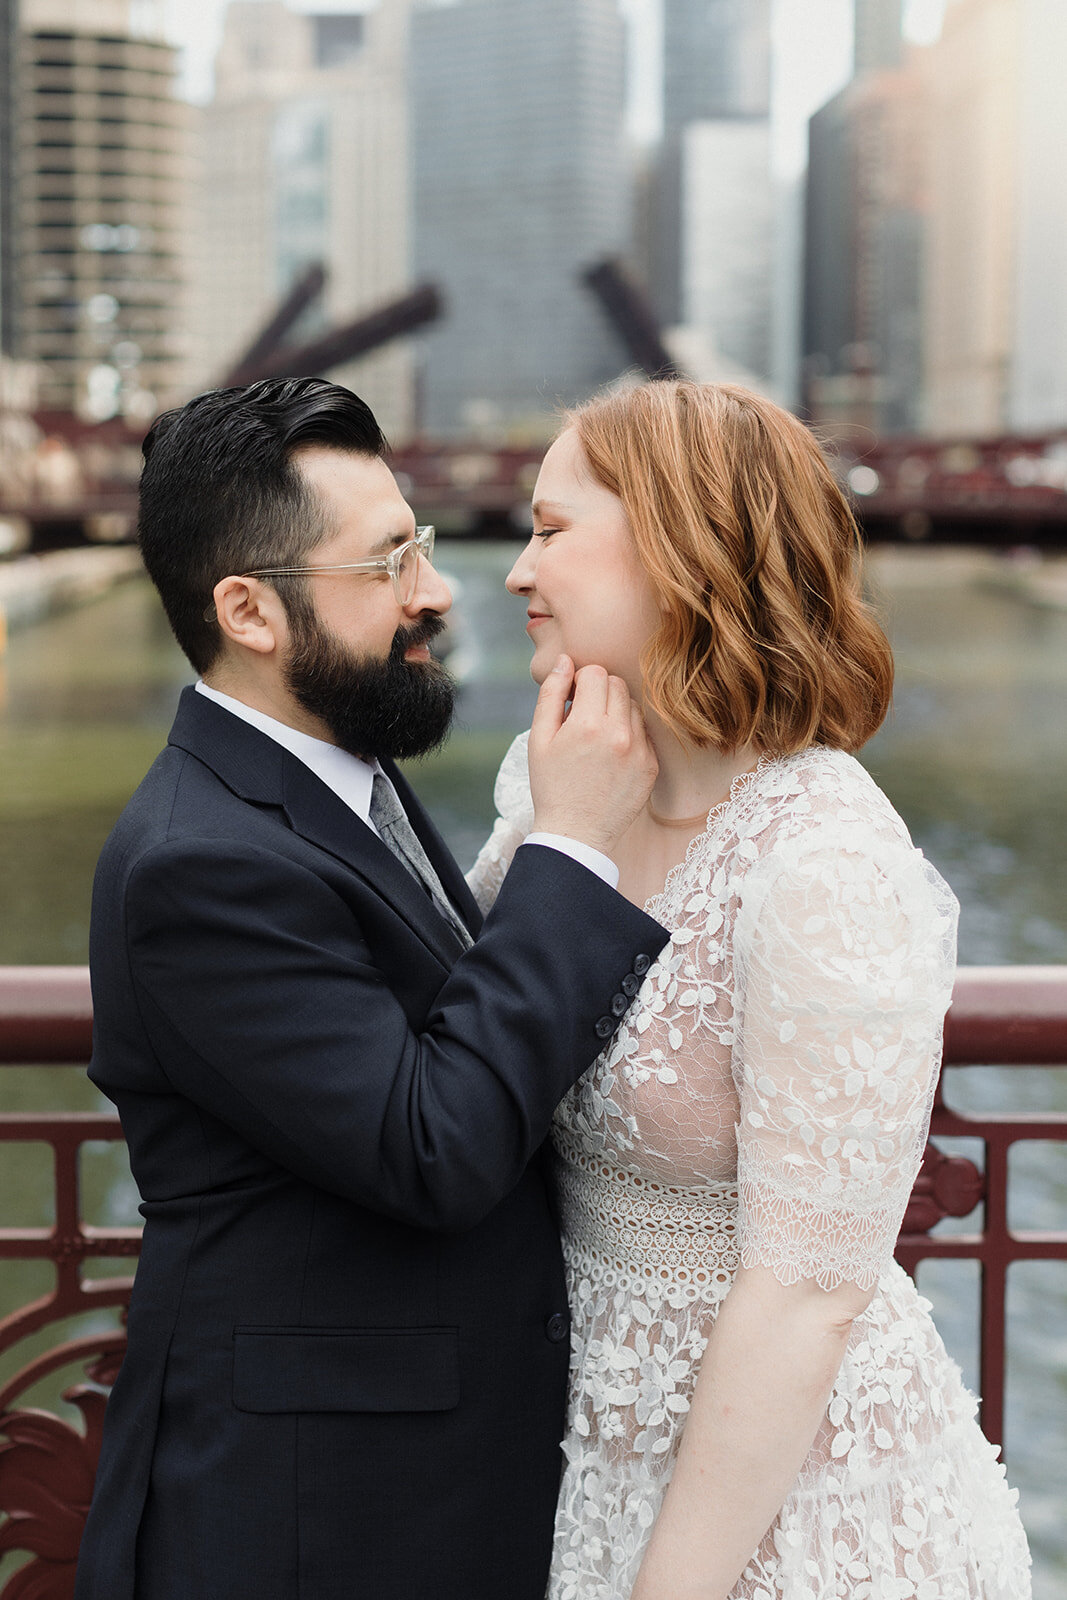 Couple standing on Chicago River steel bridge. They're in wedding clothes and standing very close, groom has is hand on bride's face and he's about to kiss her.